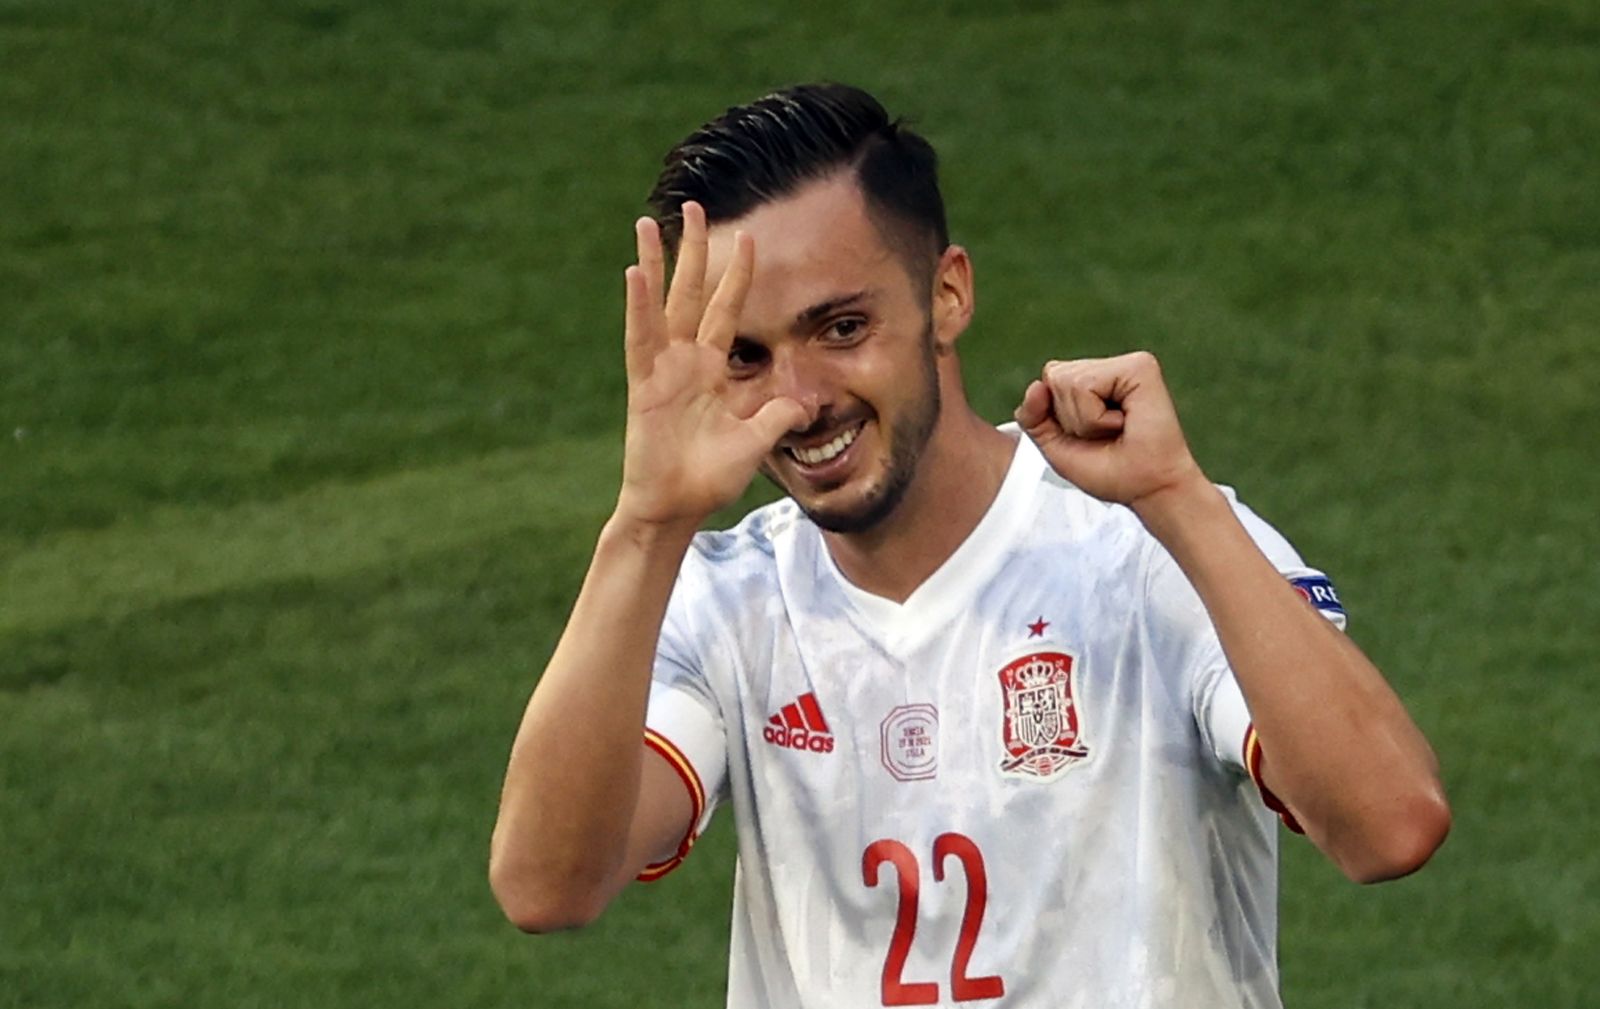 epa09296145 Pablo Sarabia of Spain celebrates scoring the 3-0 during the UEFA EURO 2020 group E preliminary round soccer match between Slovakia and Spain in Seville, Spain, 23 June 2021.  EPA/Julio Munoz / POOL (RESTRICTIONS: For editorial news reporting purposes only. Images must appear as still images and must not emulate match action video footage. Photographs published in online publications shall have an interval of at least 20 seconds between the posting.)